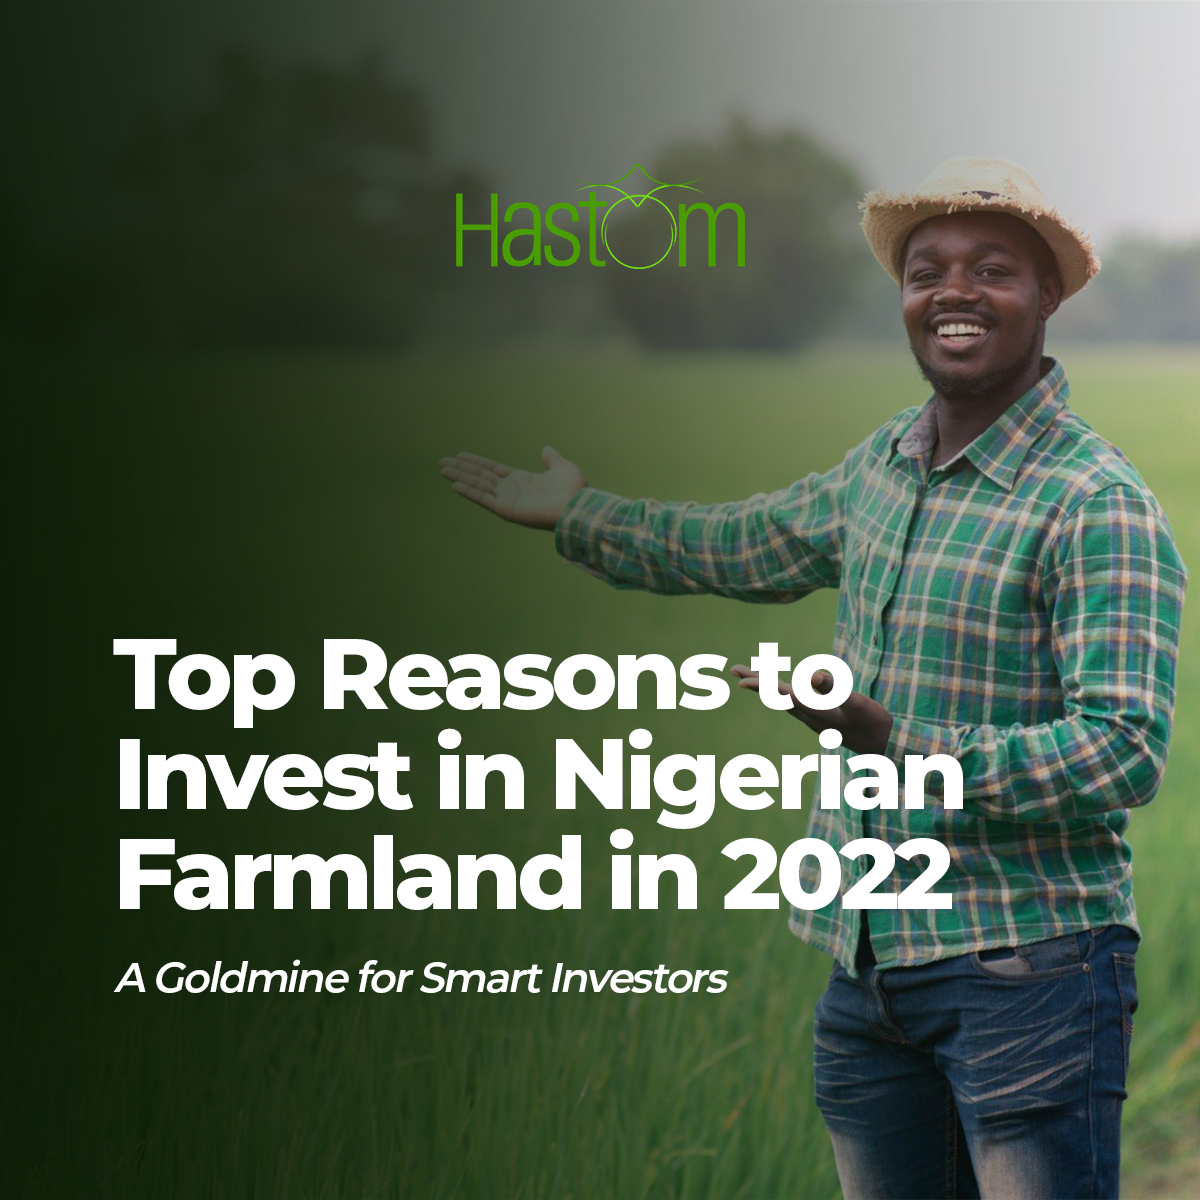 Top Reasons to Invest in Nigerian Farmland in 2022: A Goldmine for Smart Investors